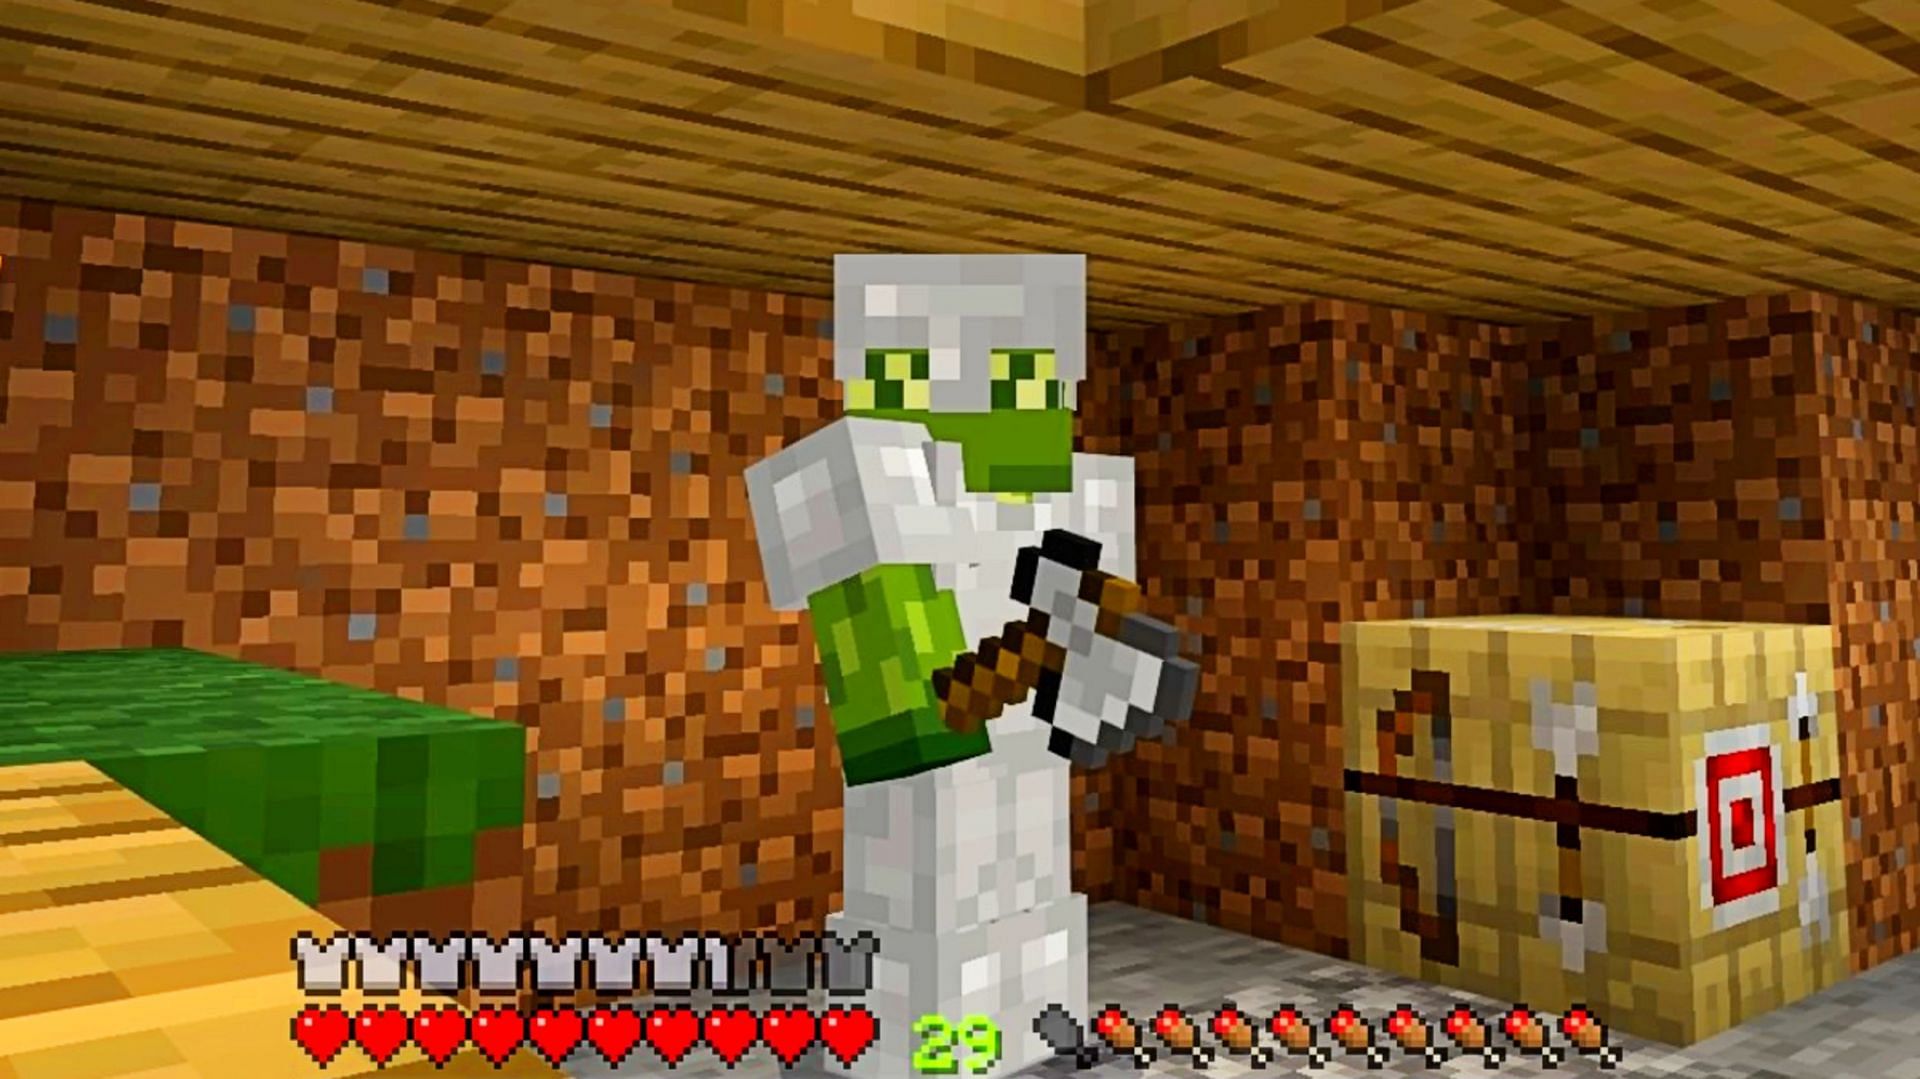 Cleaving will be an enchantment applied to axes (Image via Mojang)